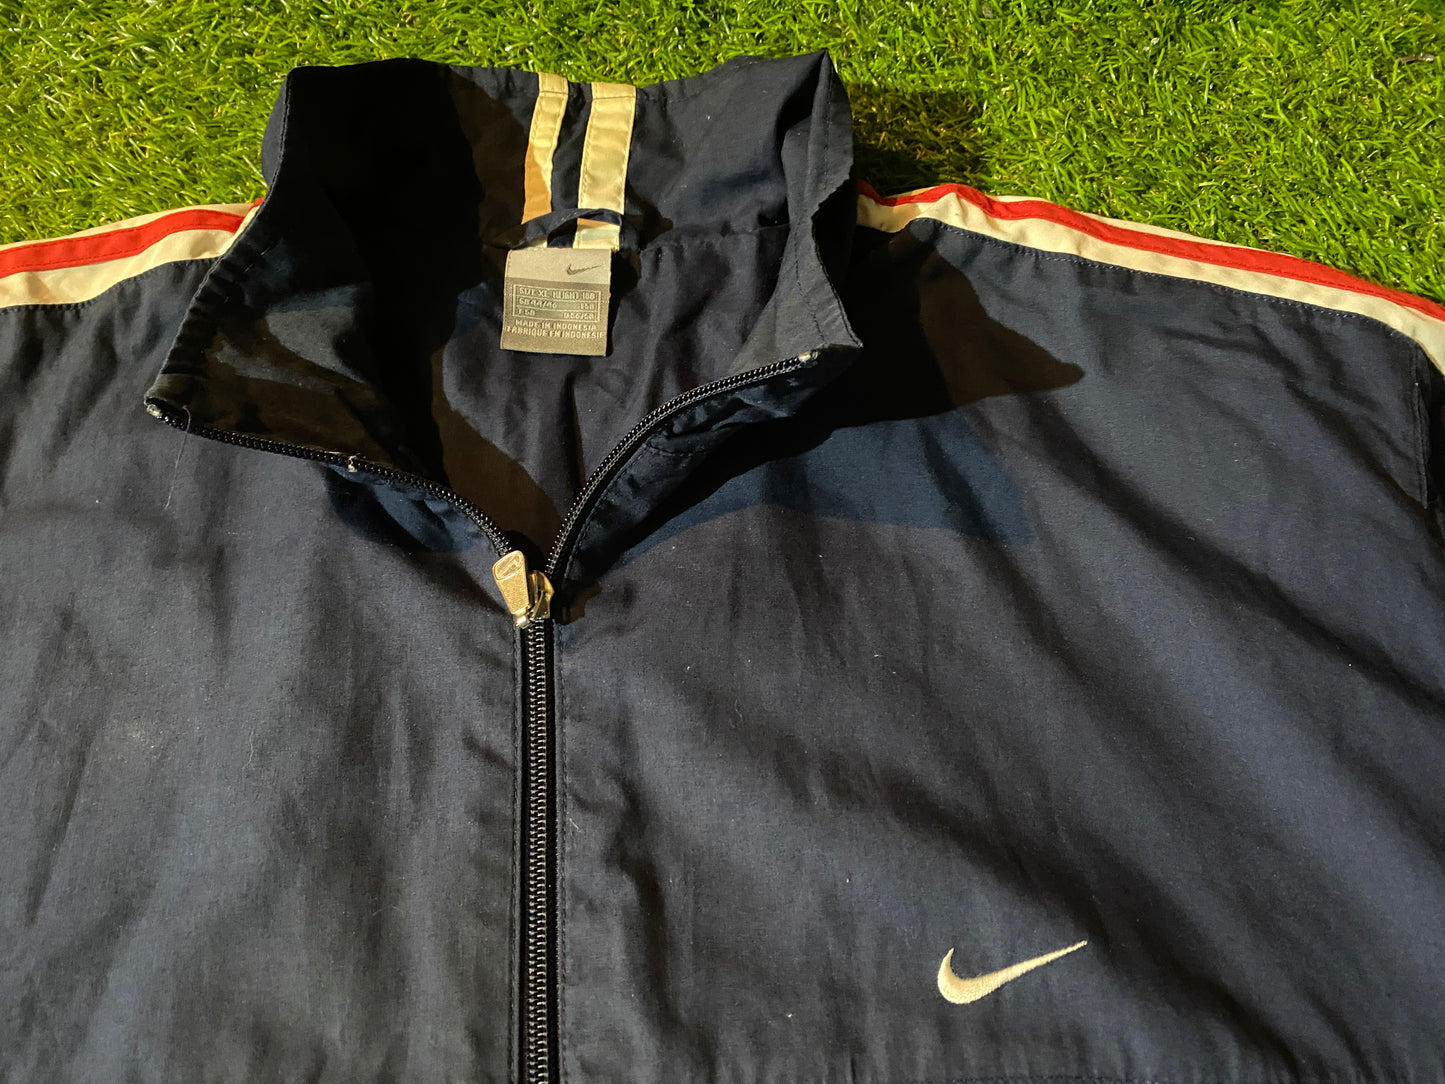 Nike Made XL Extra Large Mans Soft Cotton Thinly Lined Zip Up Jacket / Coat